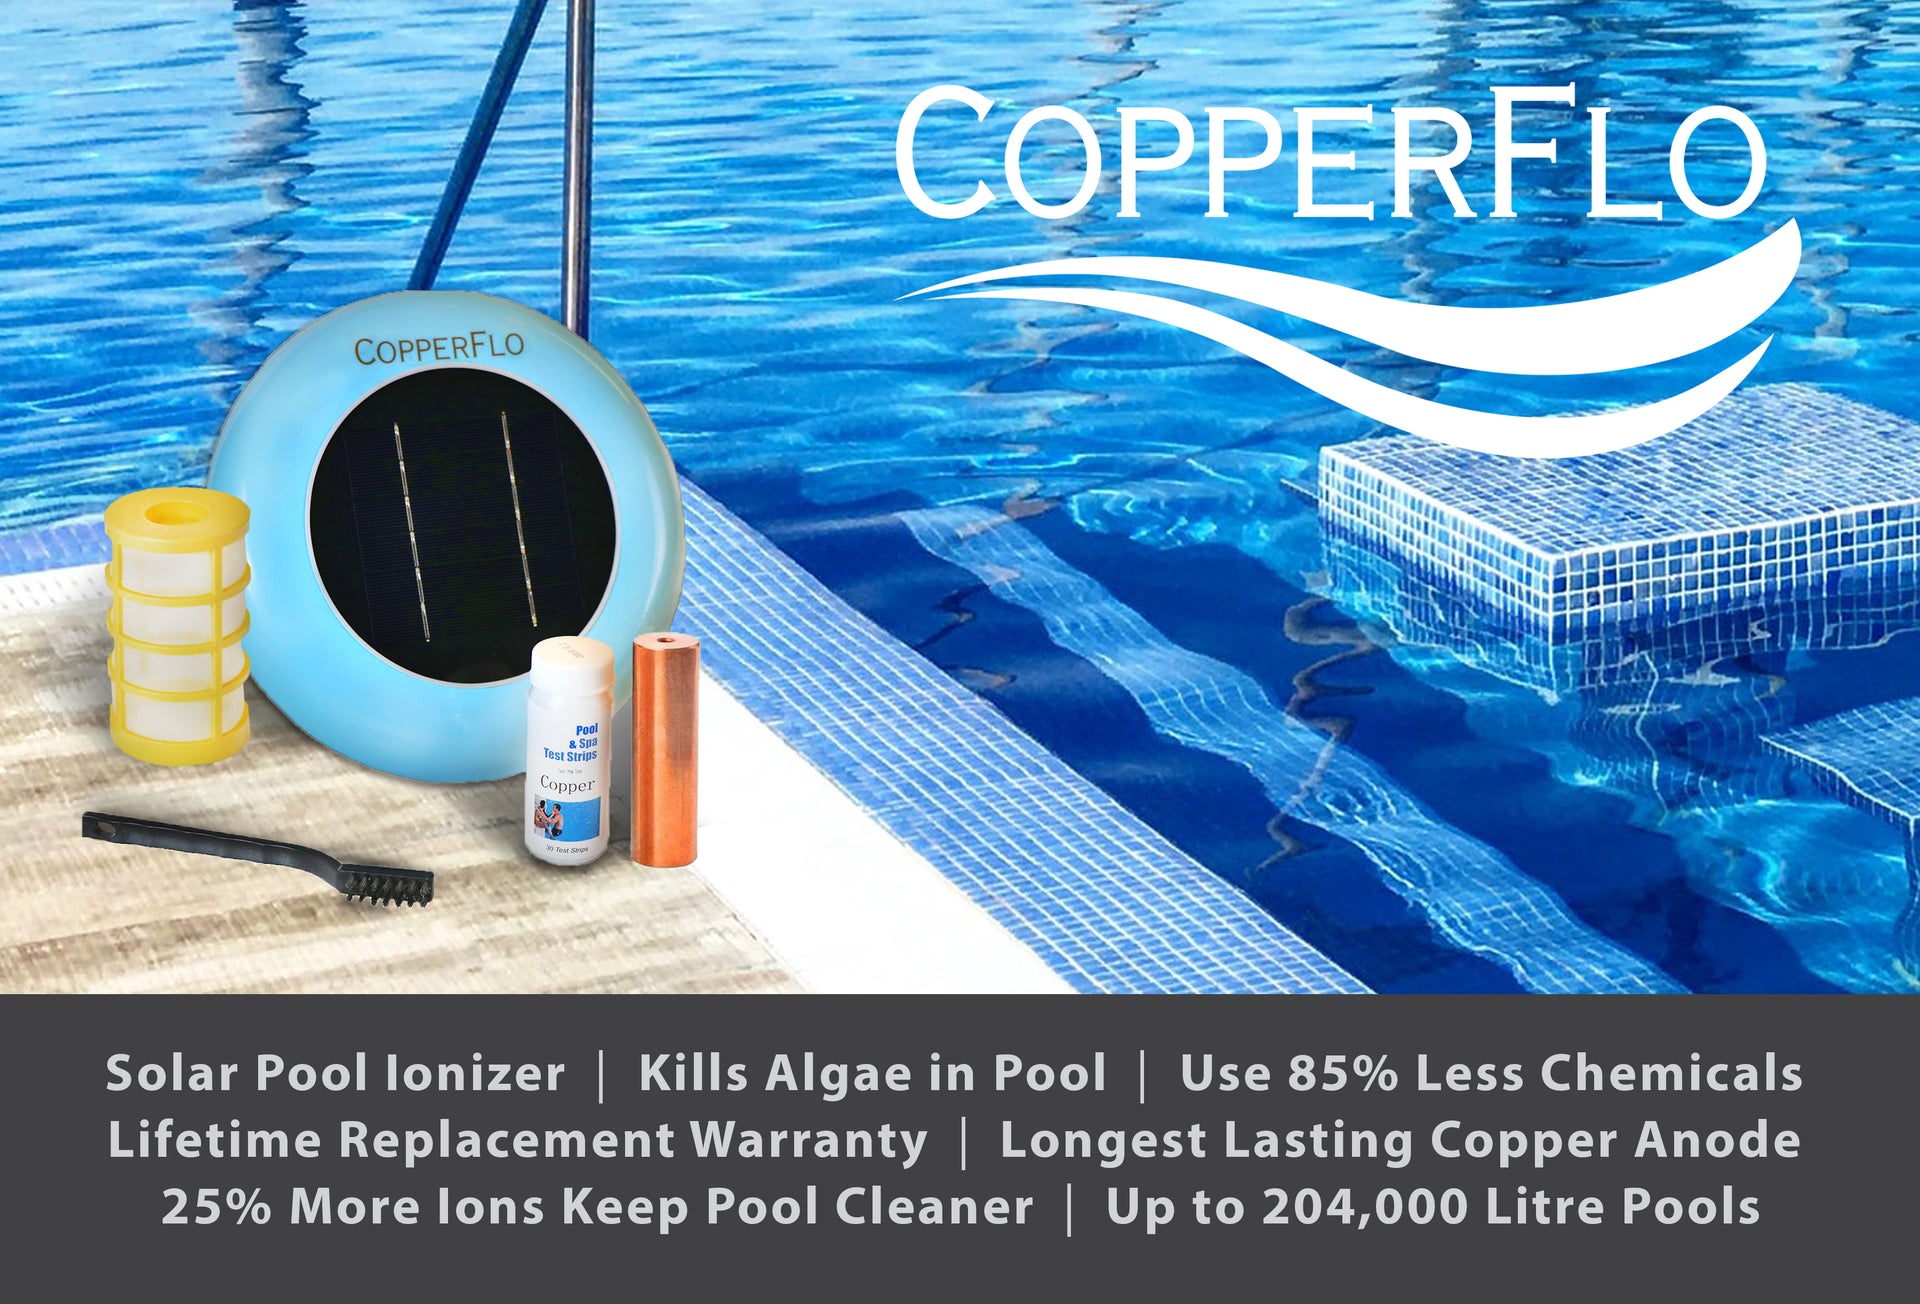 Load video: Learn about the CopperFlo Solar Pool Ionizer